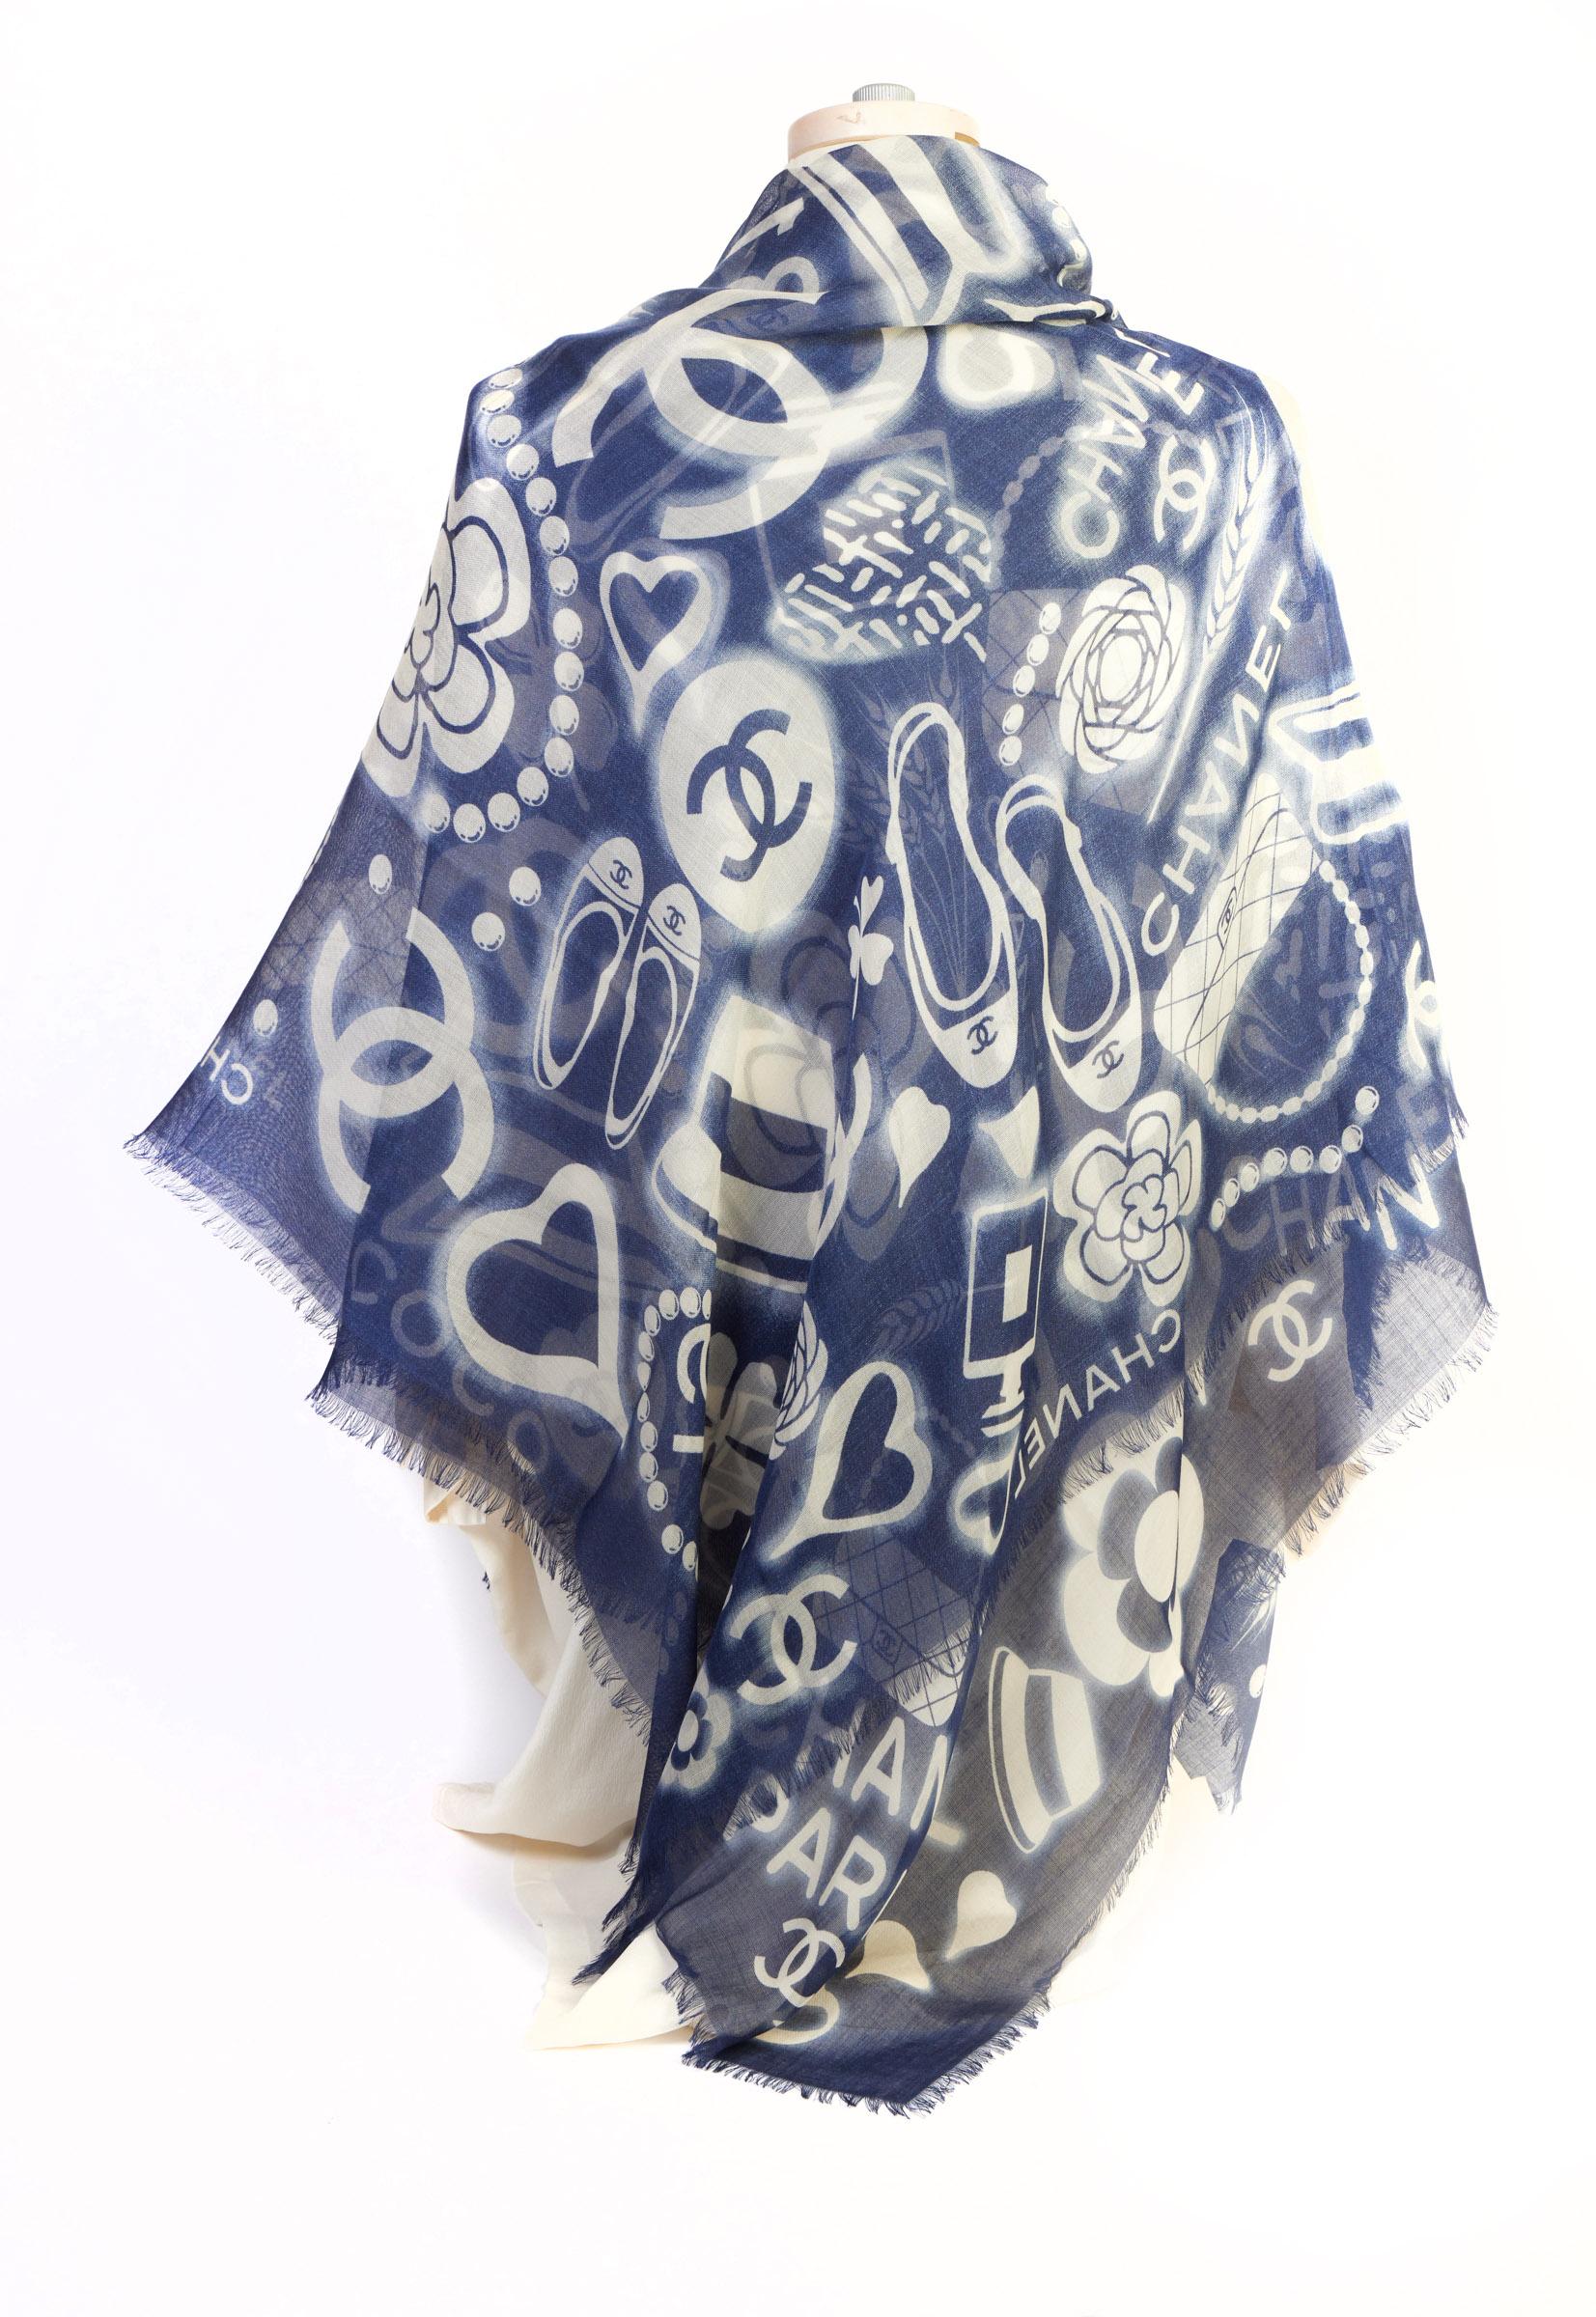 Chanel brand new 65% cashmere 35% silk blue and white iconic symbols square oversize shawl. Comes with original tag.